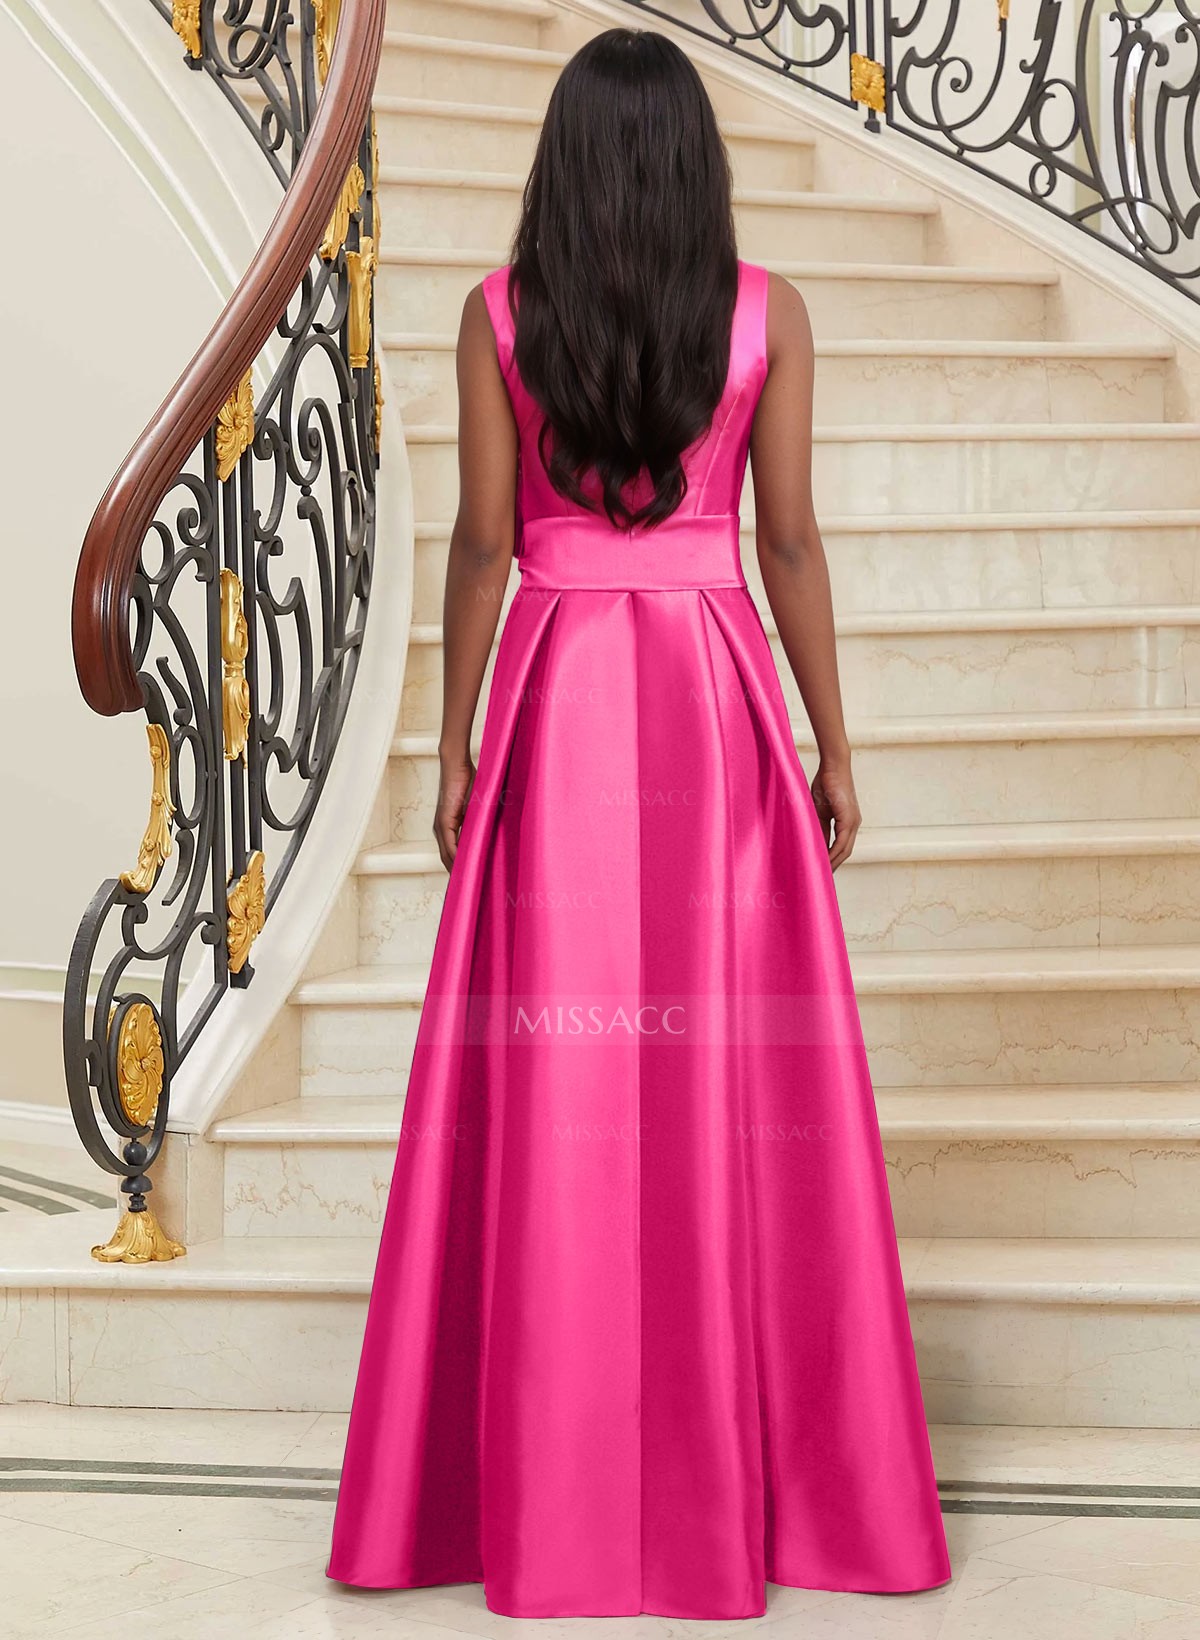 A-Line V-Neck Sleeveless Satin Mother Of The Bride Dresses With Sash